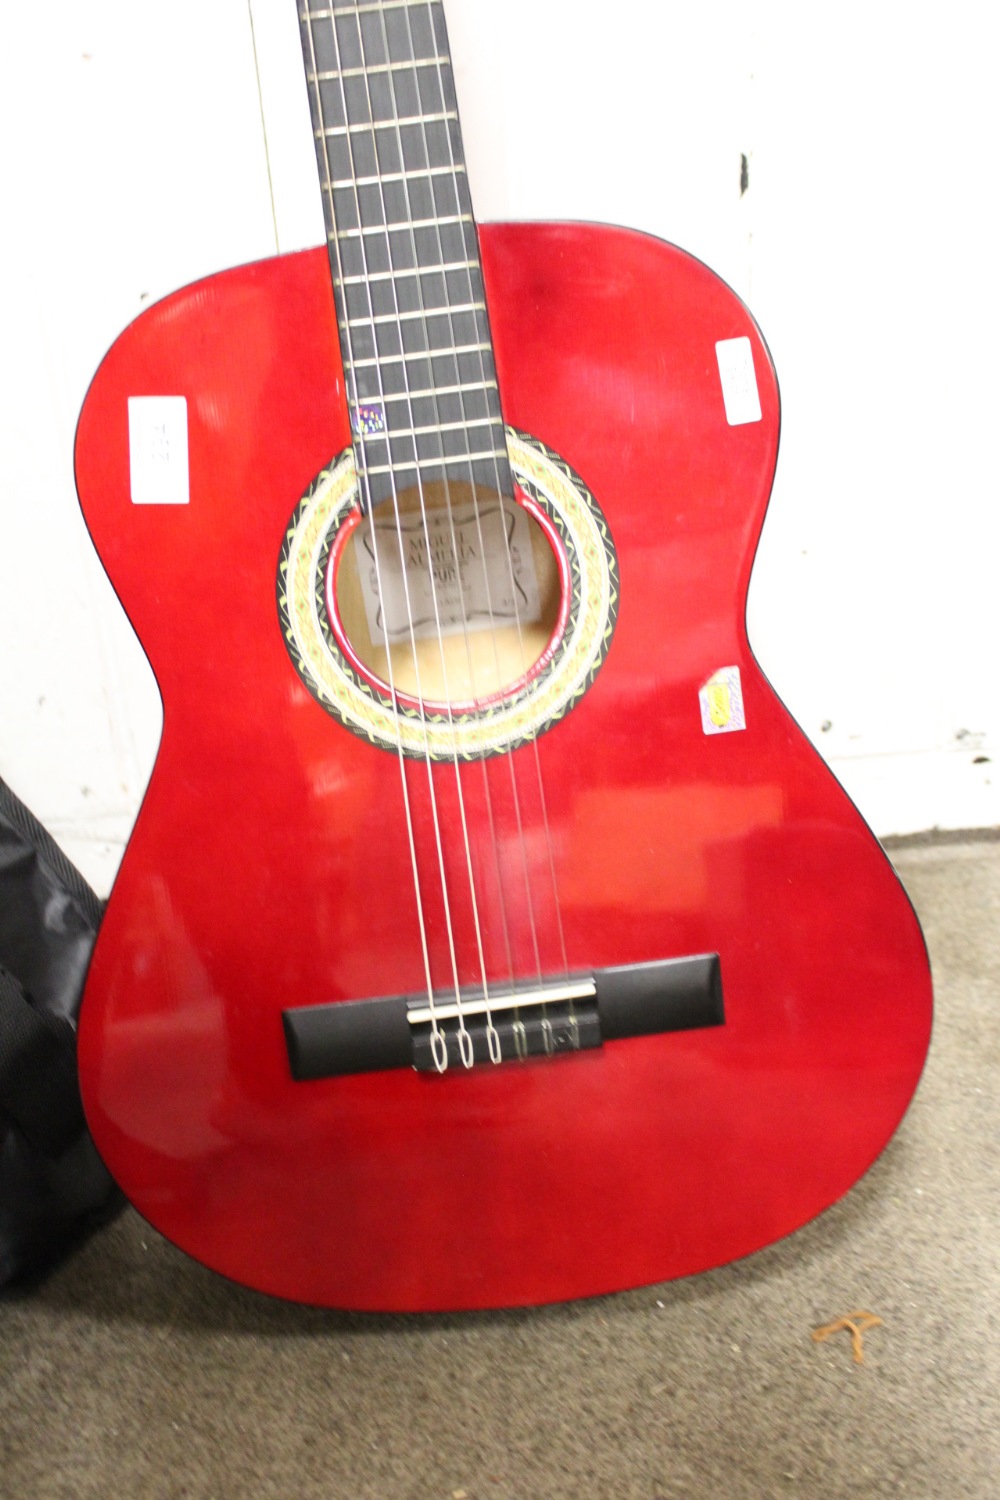 A CHILDS MIGUEL ALMERA PURE SERIES CLASSIC ACOUSTIC GUITAR IN CHERRY RED FINISH, WITH SOFT CARRY - Image 3 of 4